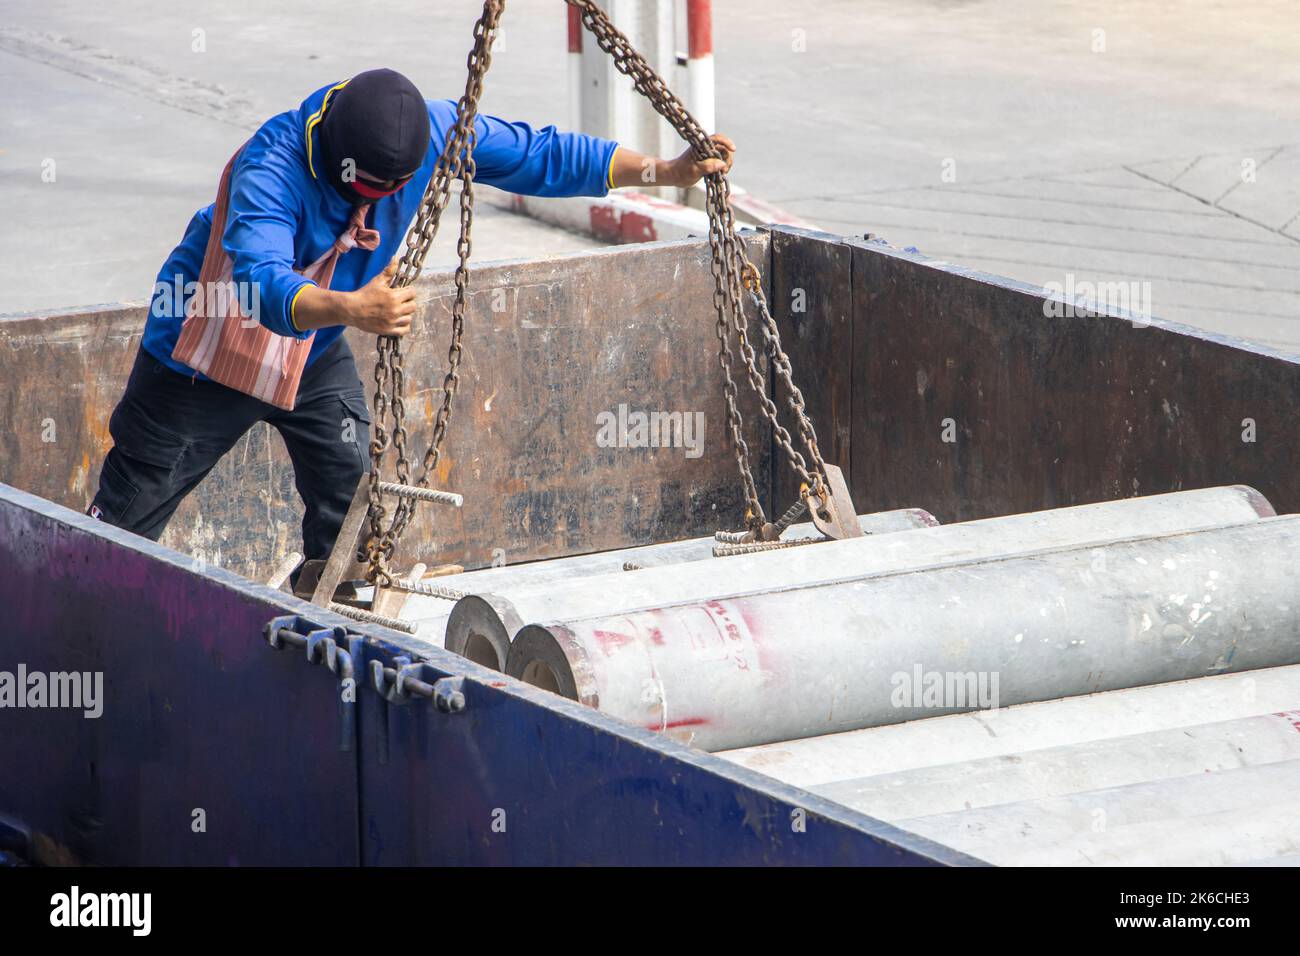 A worker attaches chains from a crane to concrete tubes on the load space of a truck Stock Photo